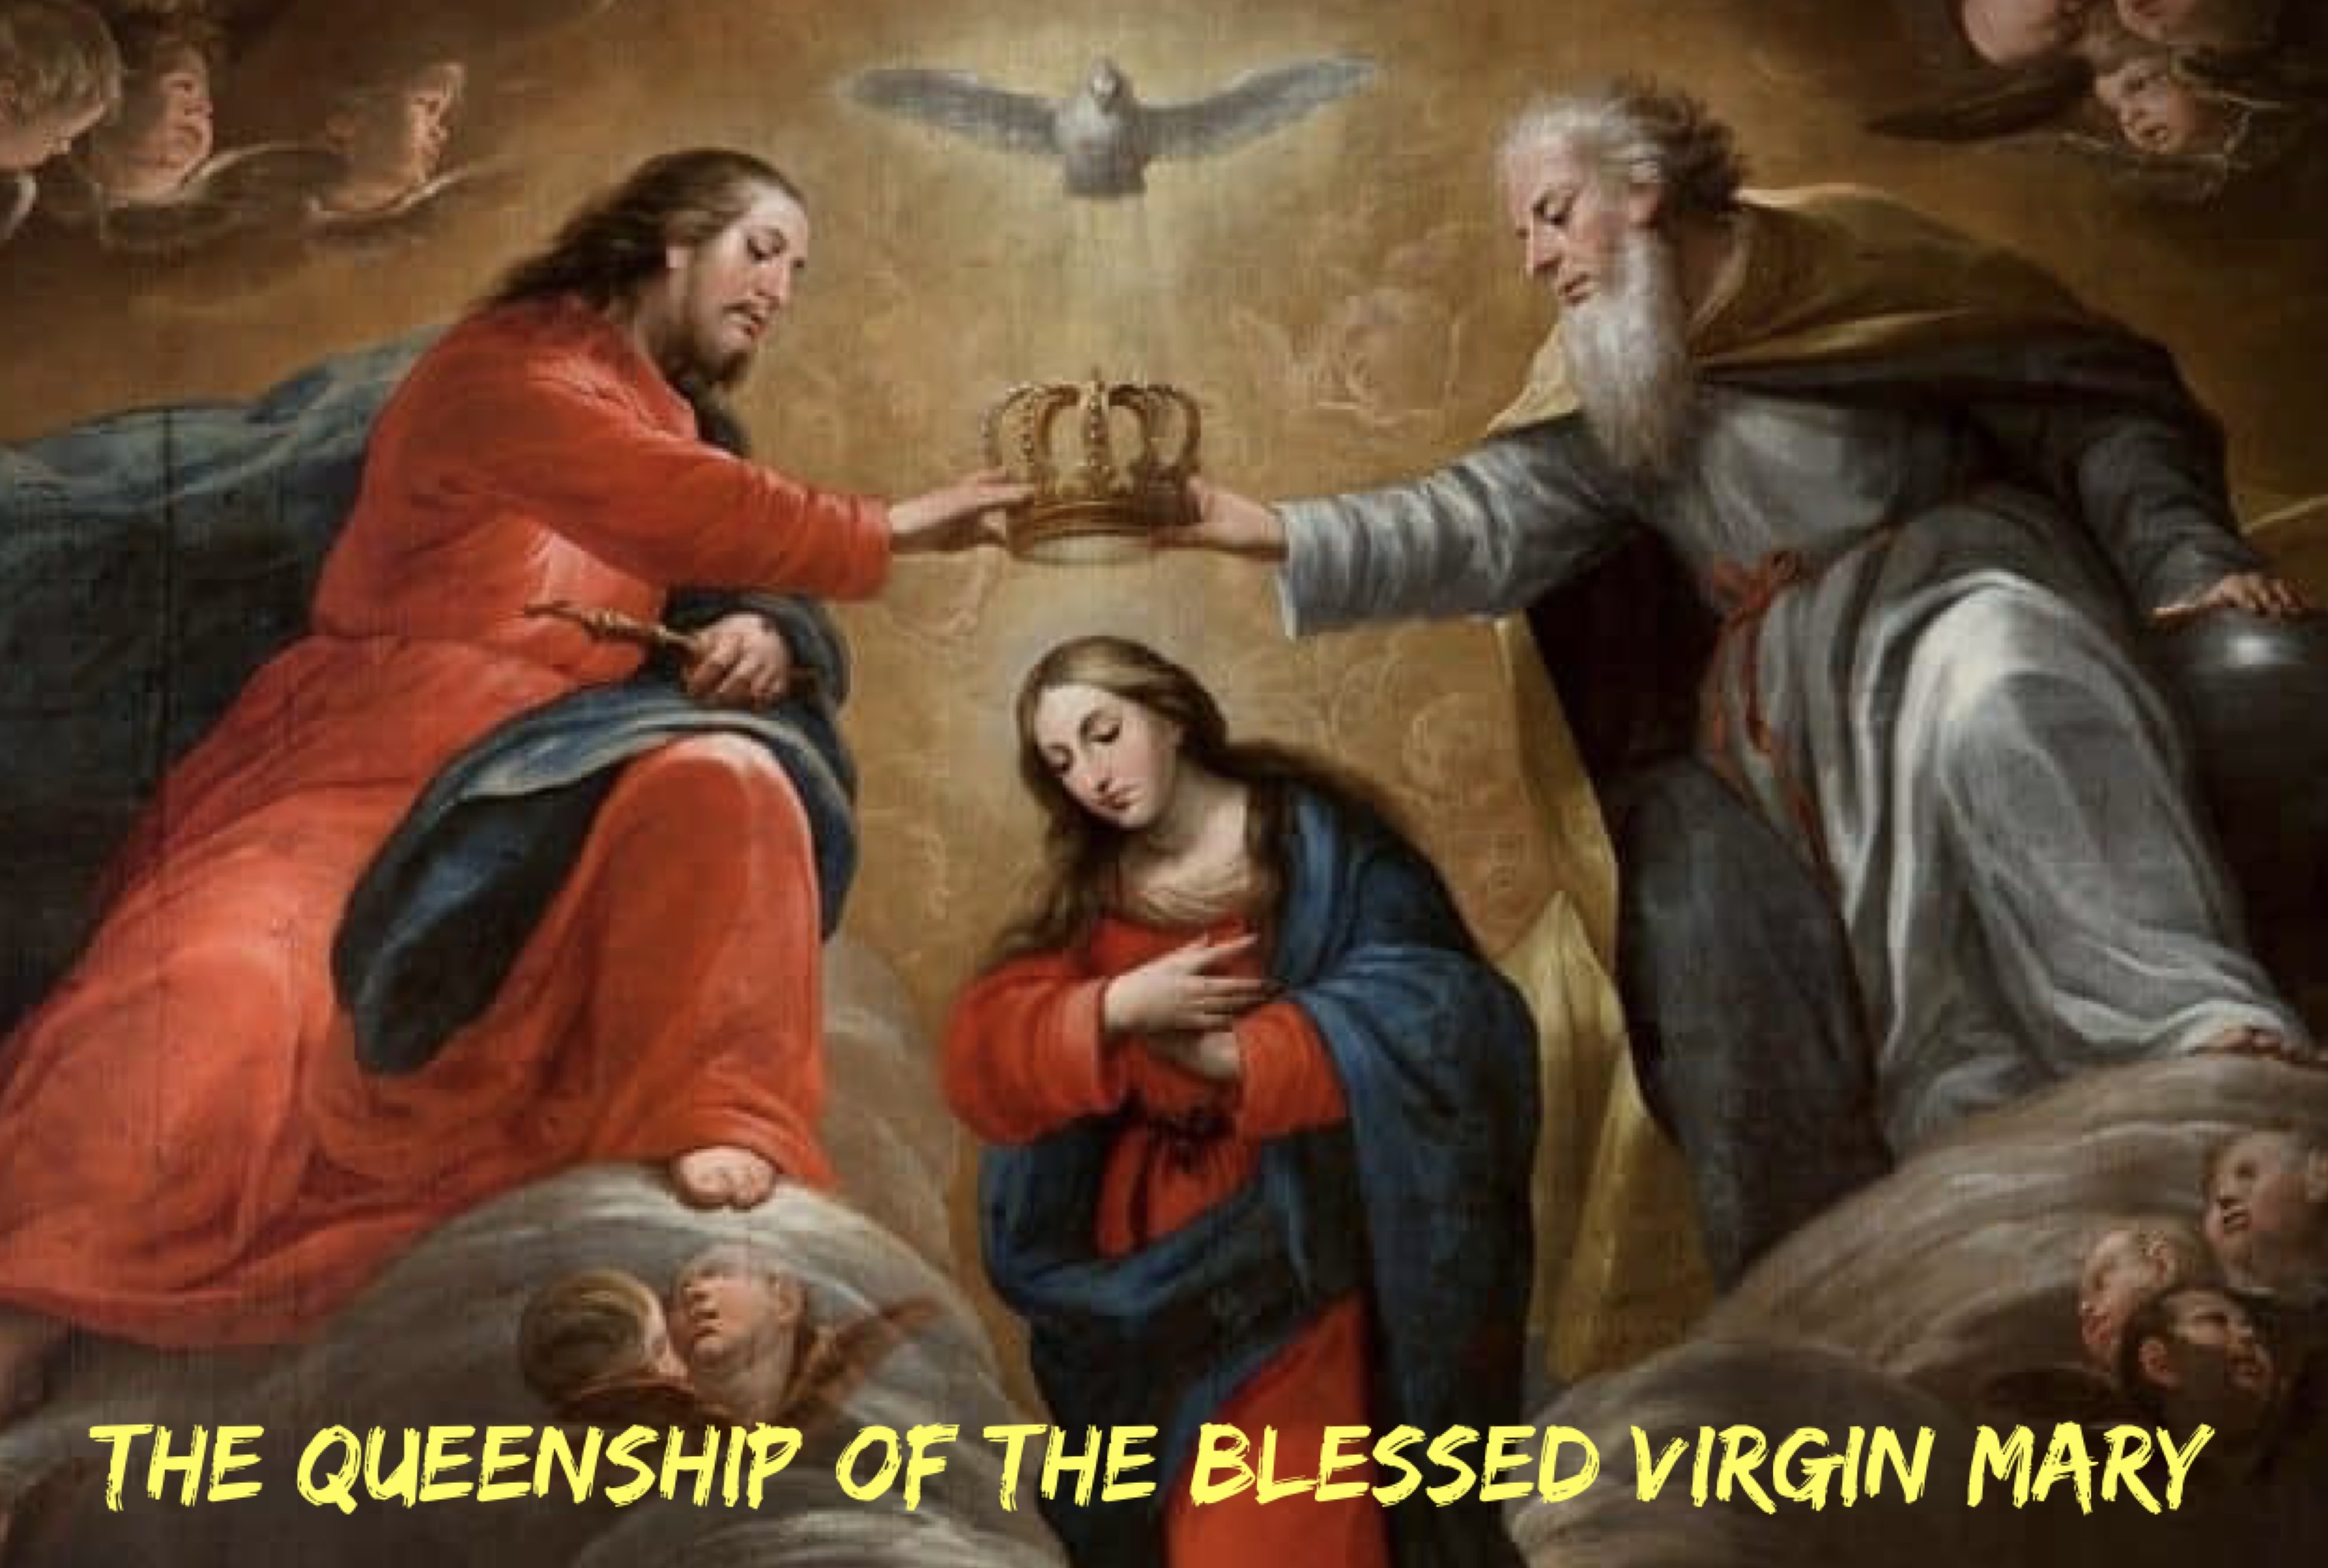 22nd August - The Queenship of the Blessed Virgin Mary